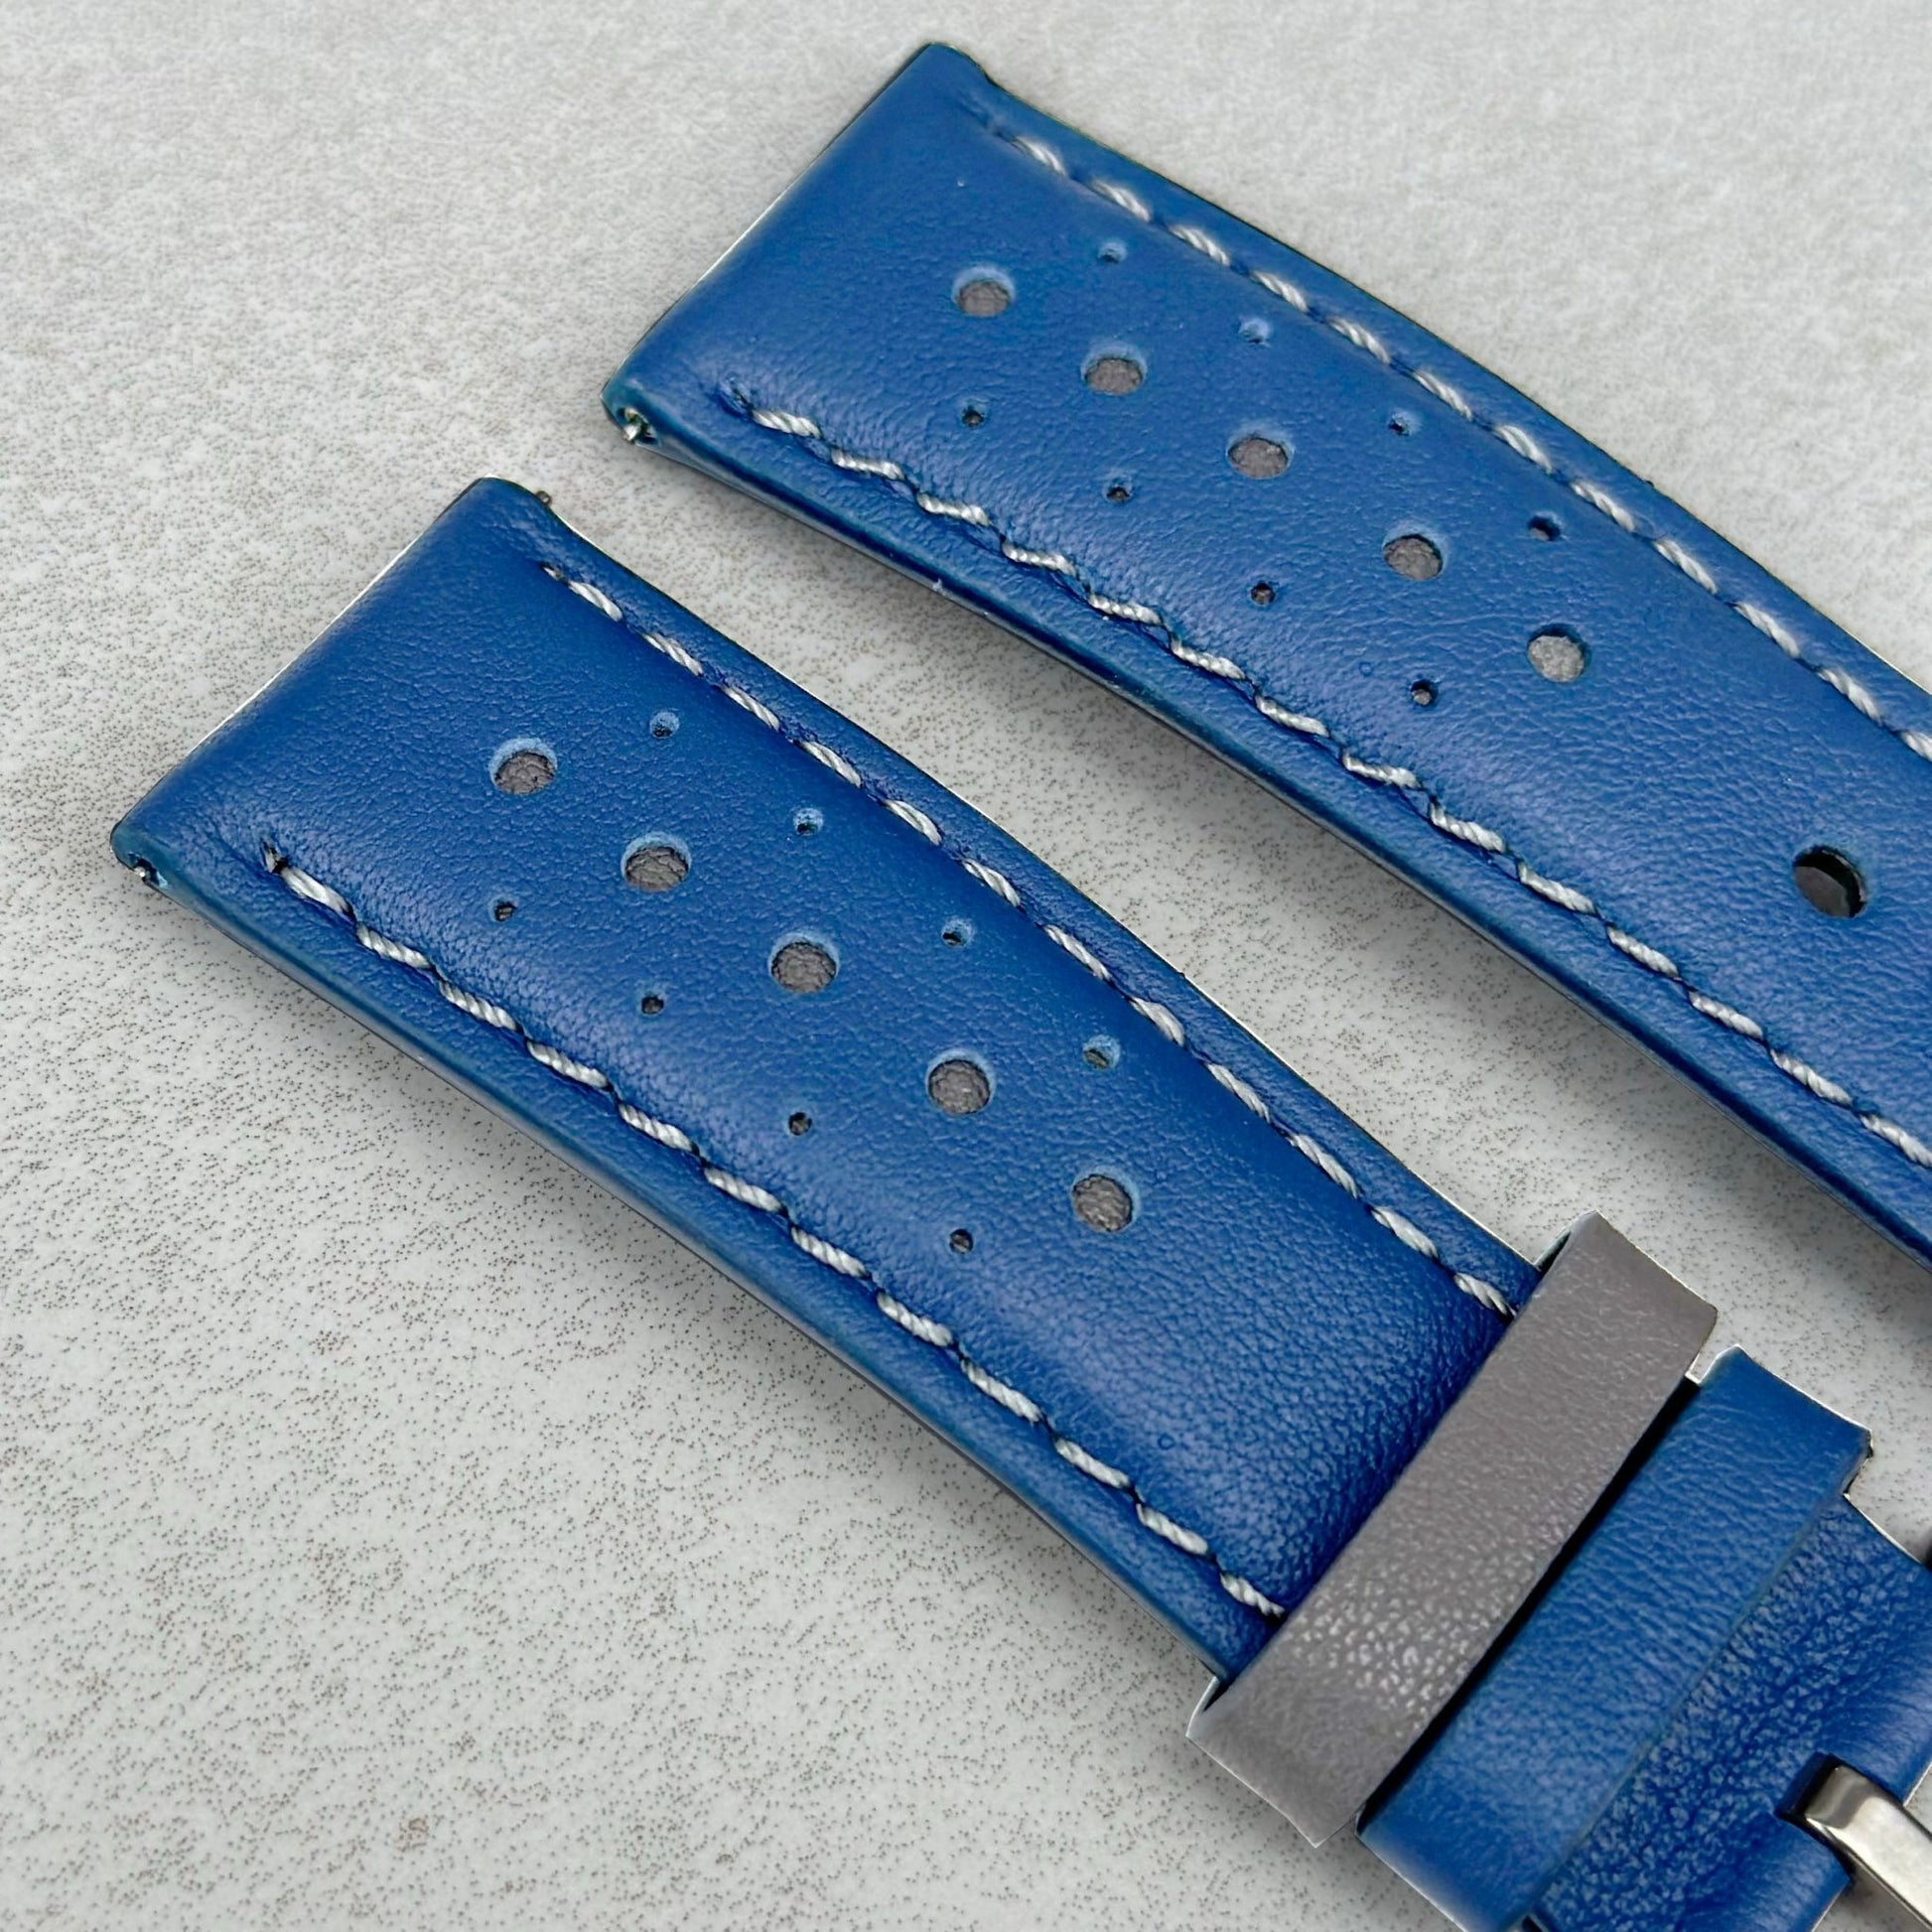 Top of the Le Mans blue and grey racing watch strap.